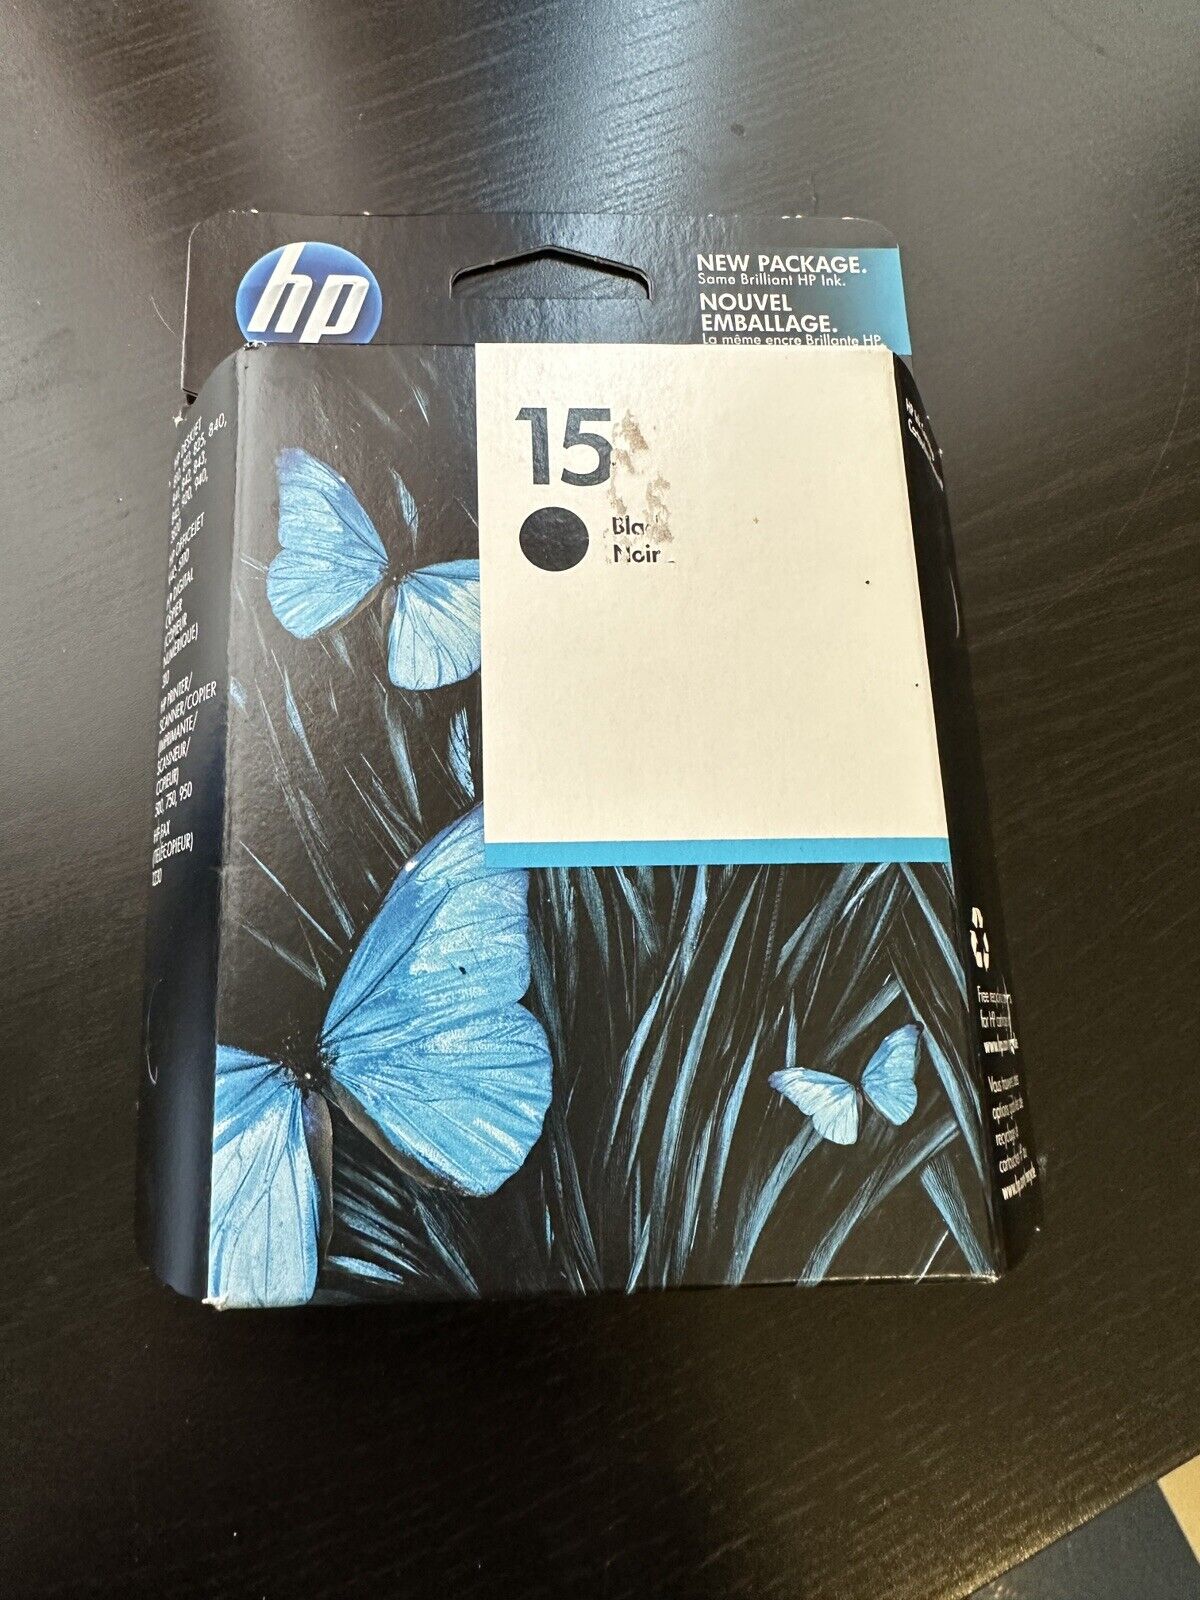 HP 15 (C6615DN) Black Ink Cartridge New Sealed Expired May 2011